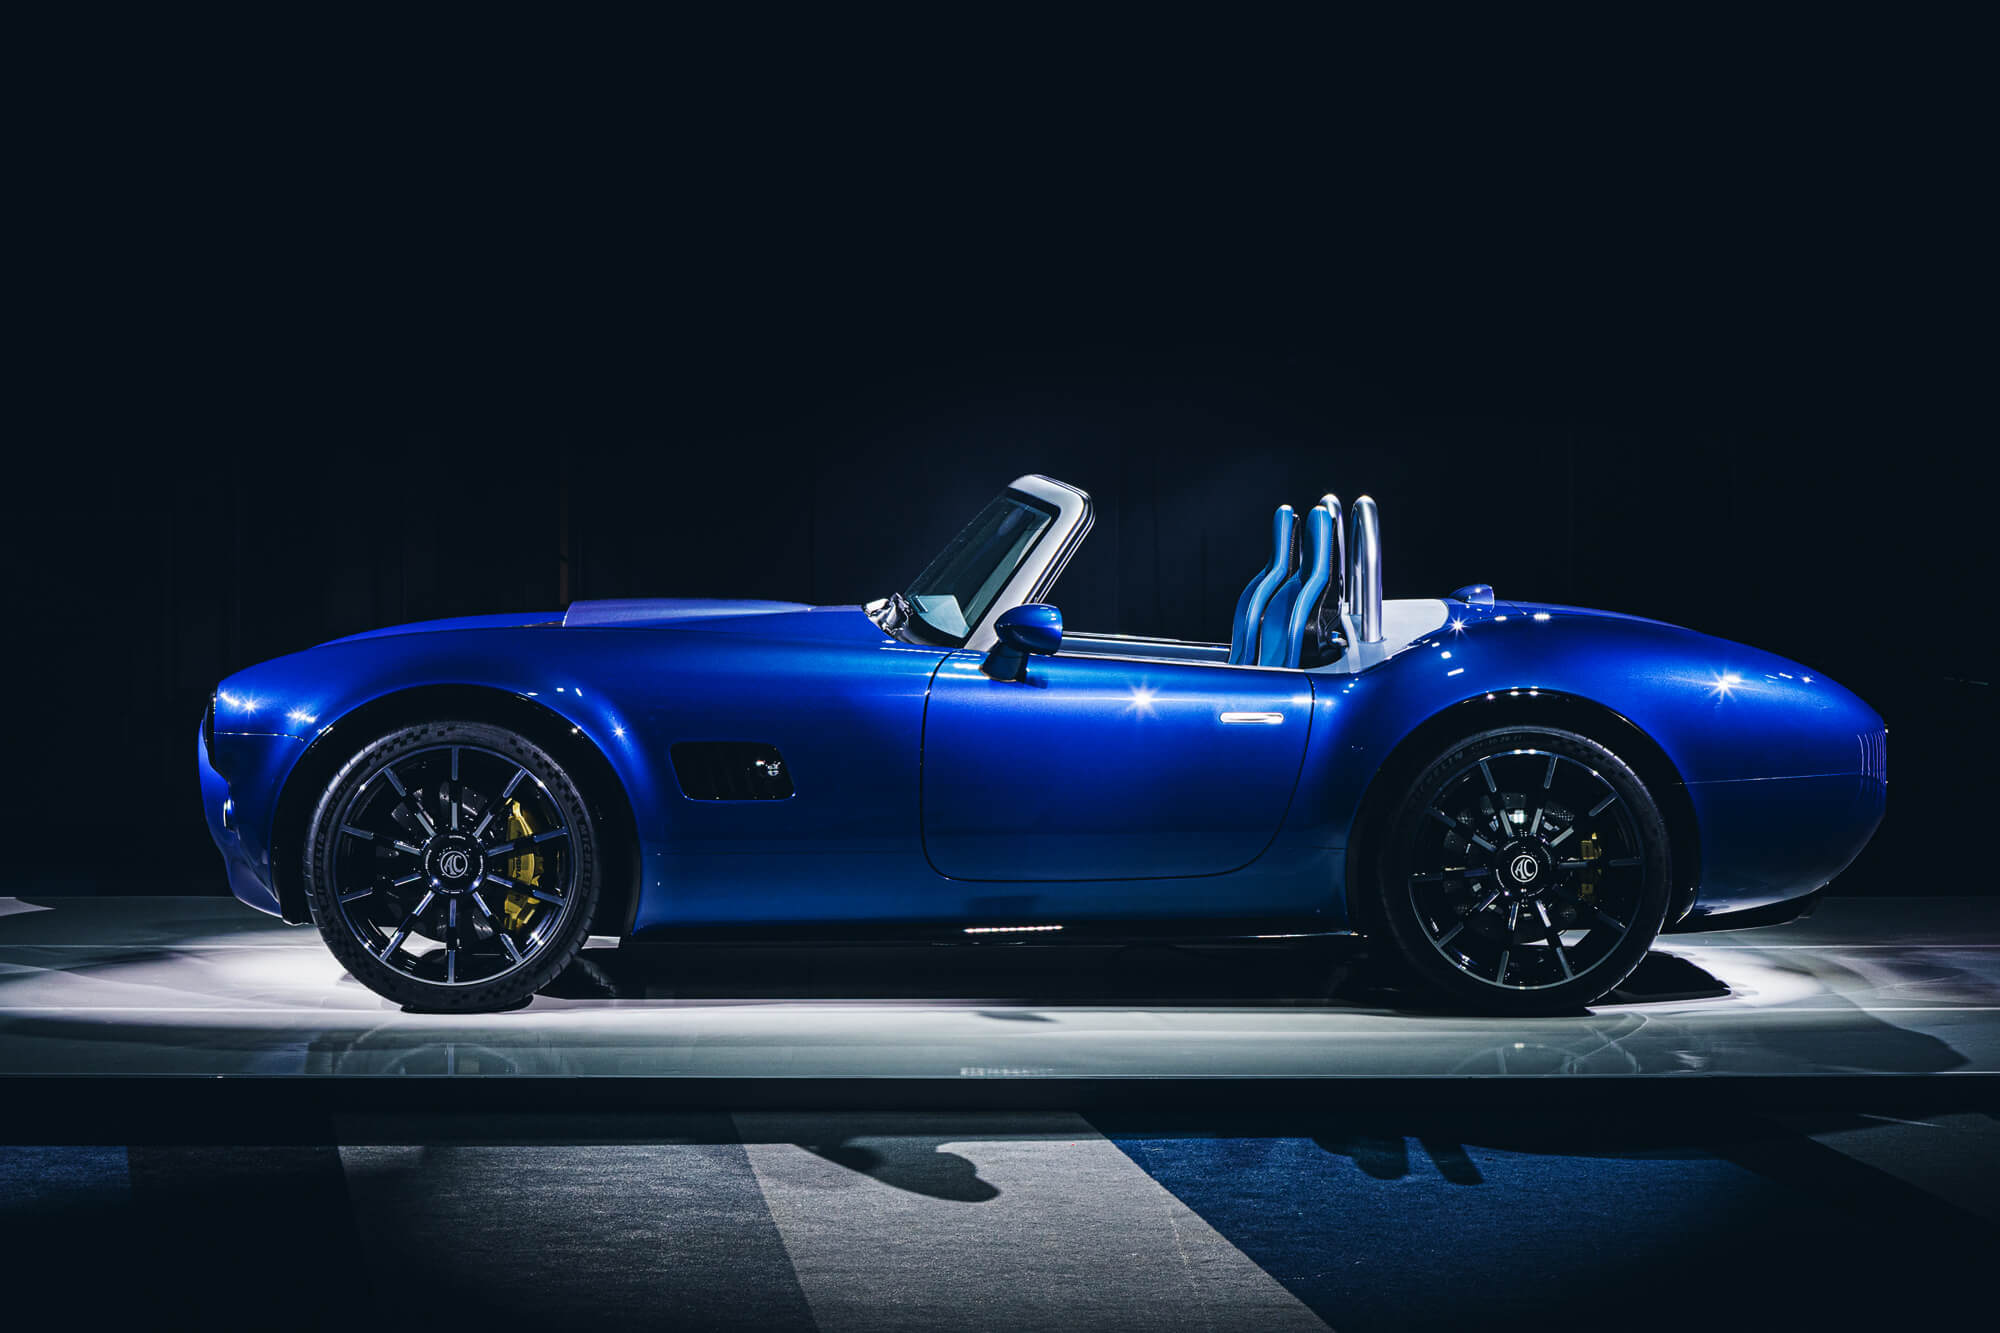 AC Cobra GT Roadster on stage London unveil